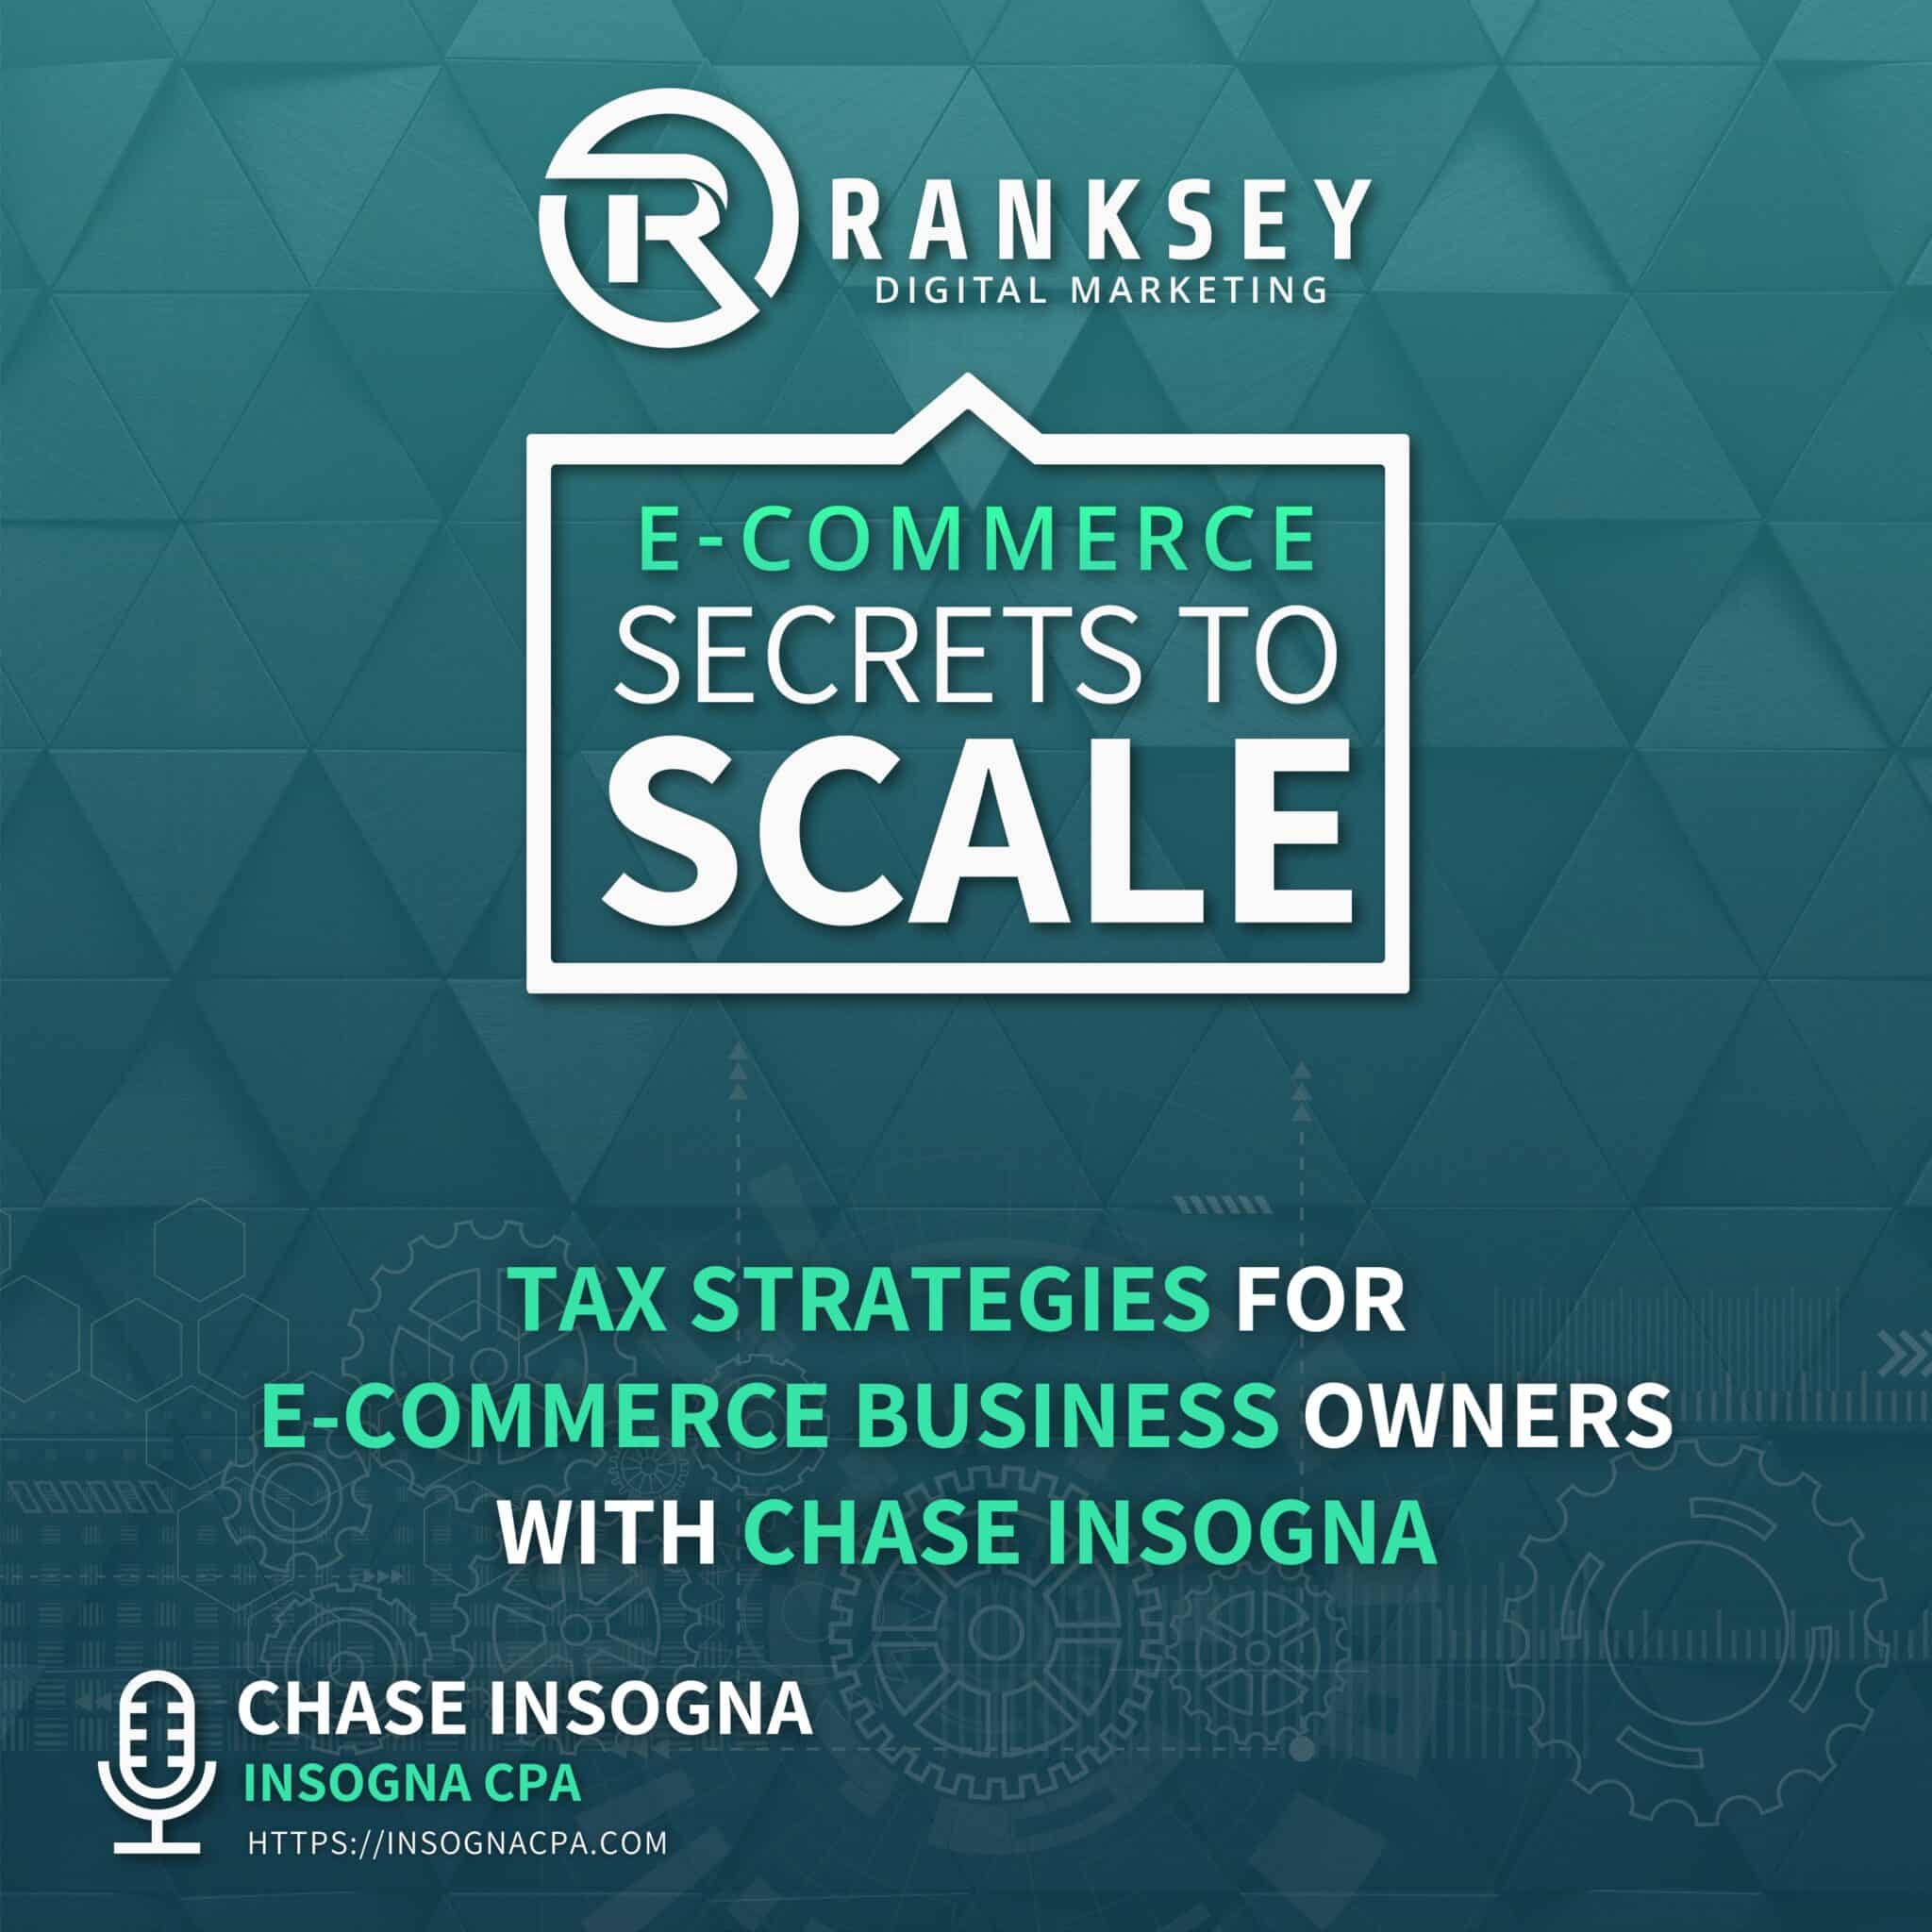 Tax Strategies For E-Commerce Business Owners With Chase Insogna